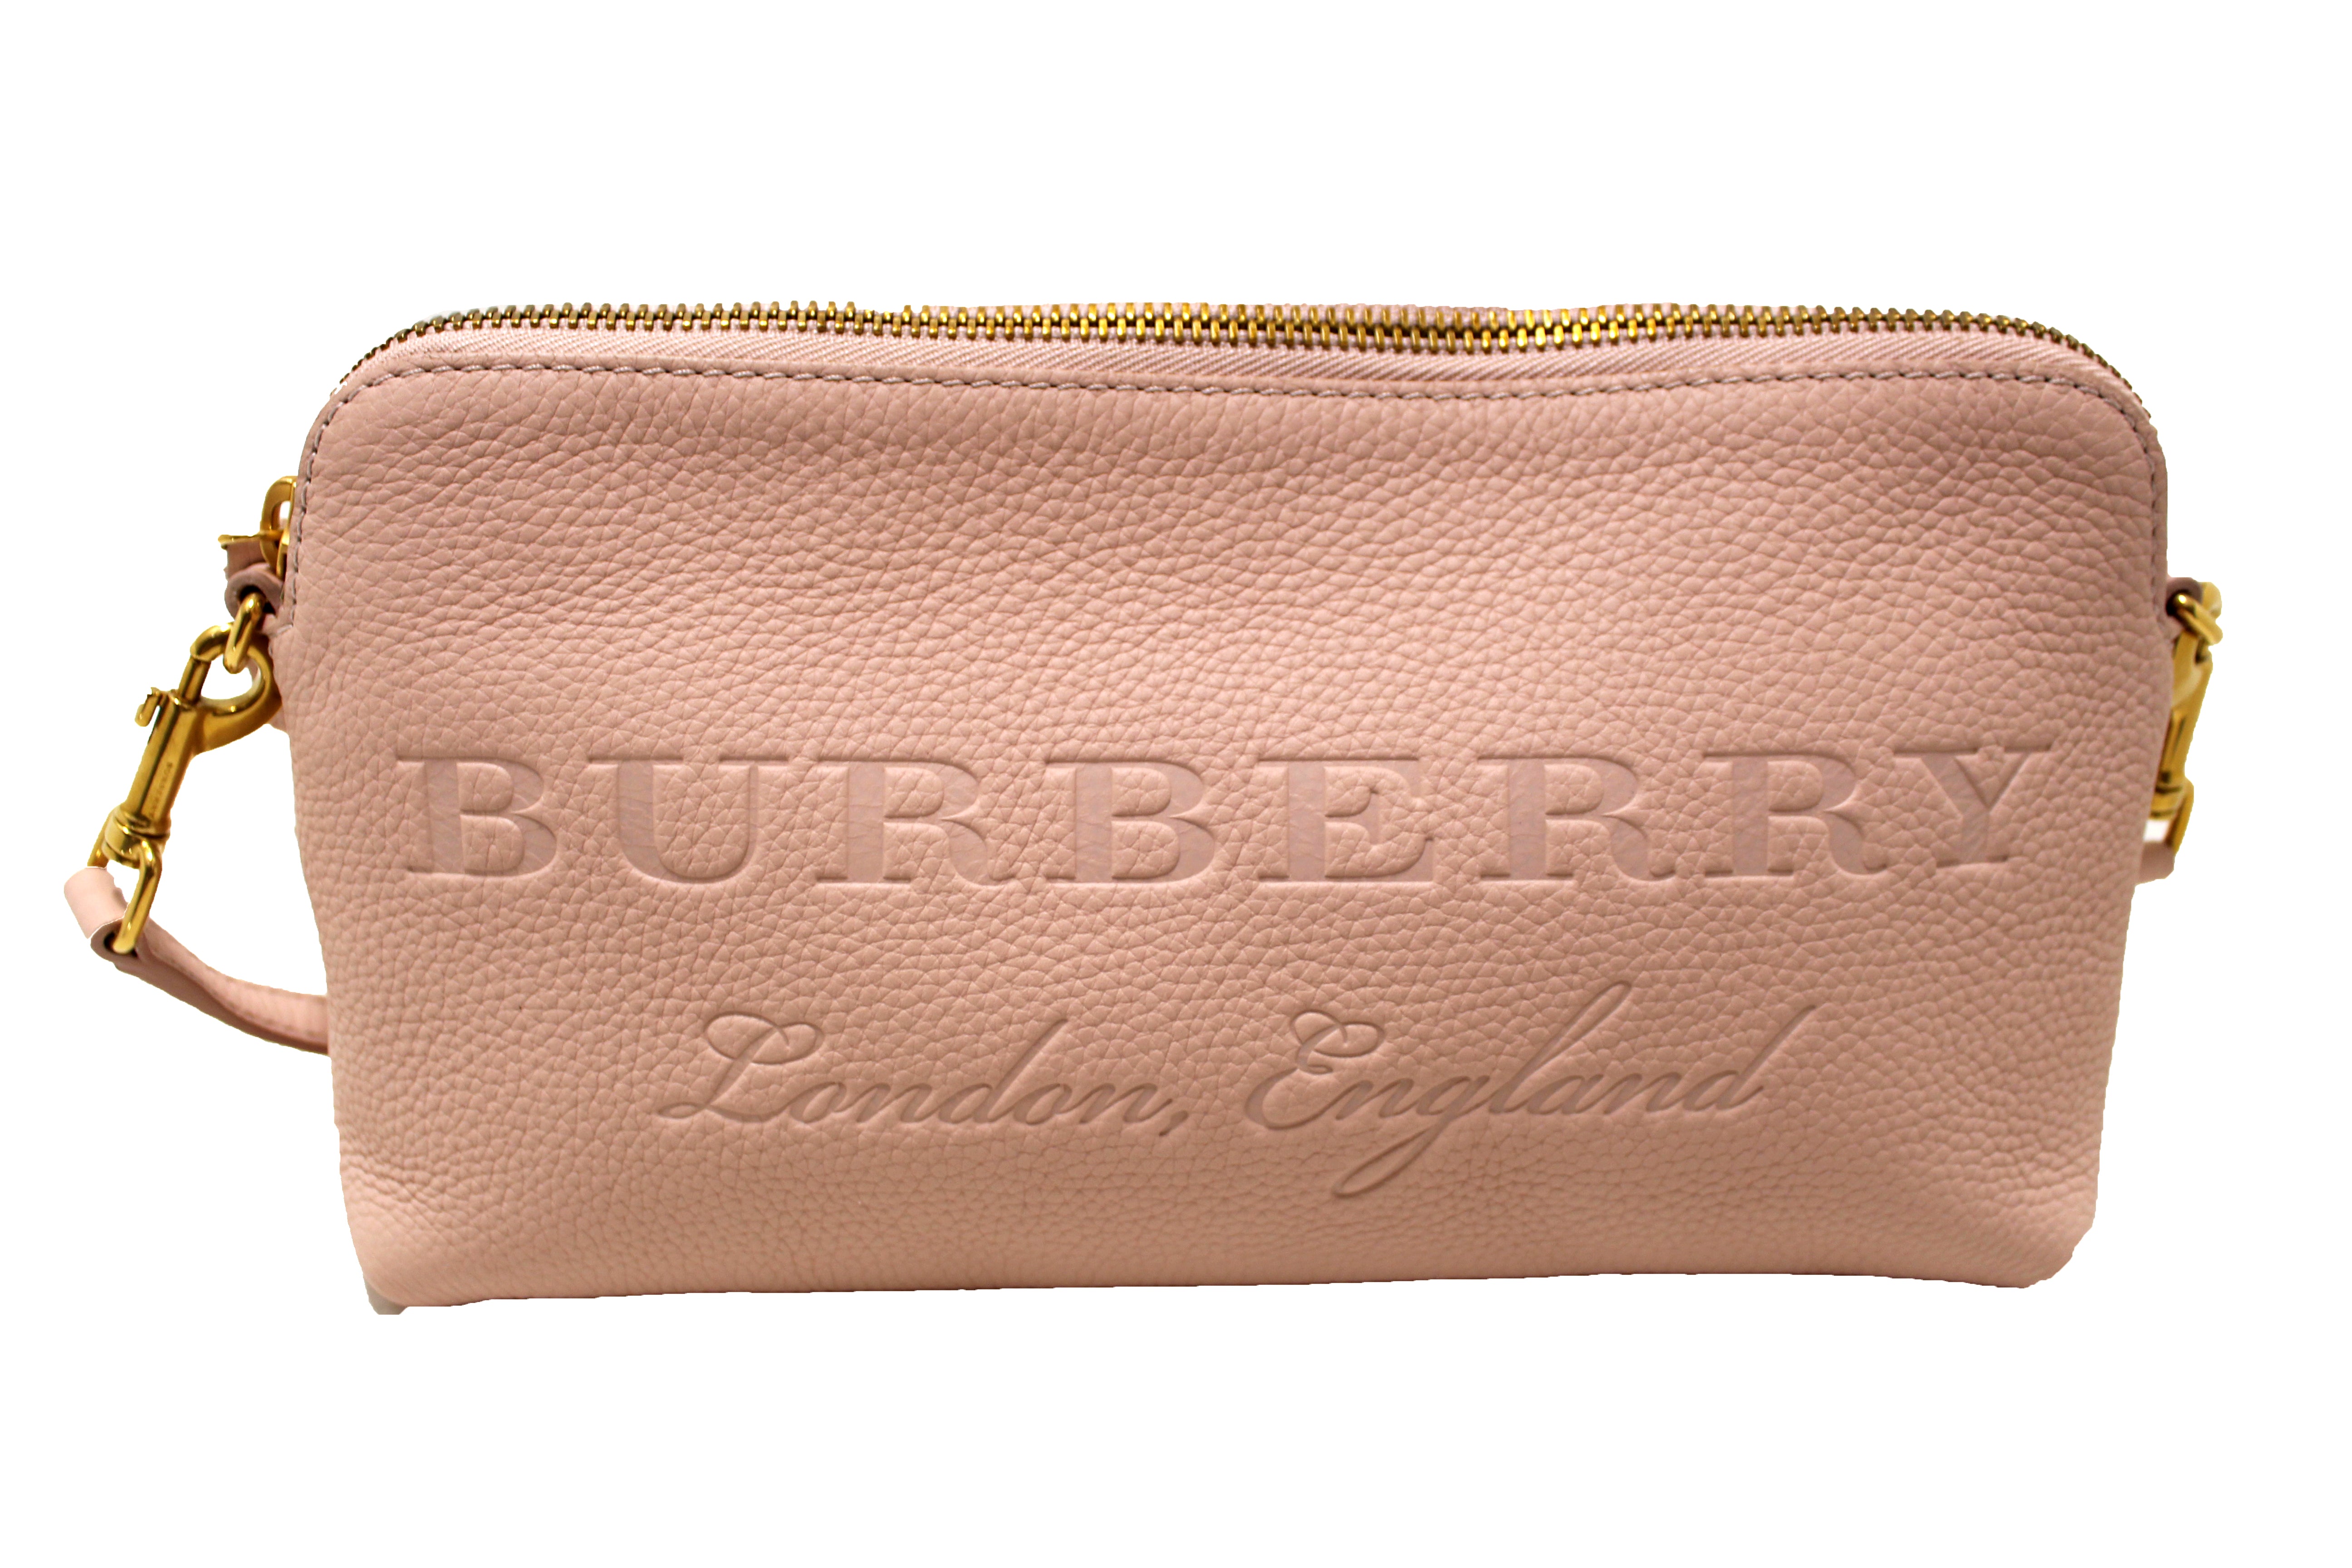 Authentic Burberry Light Pink Leather Small Messenger Bag